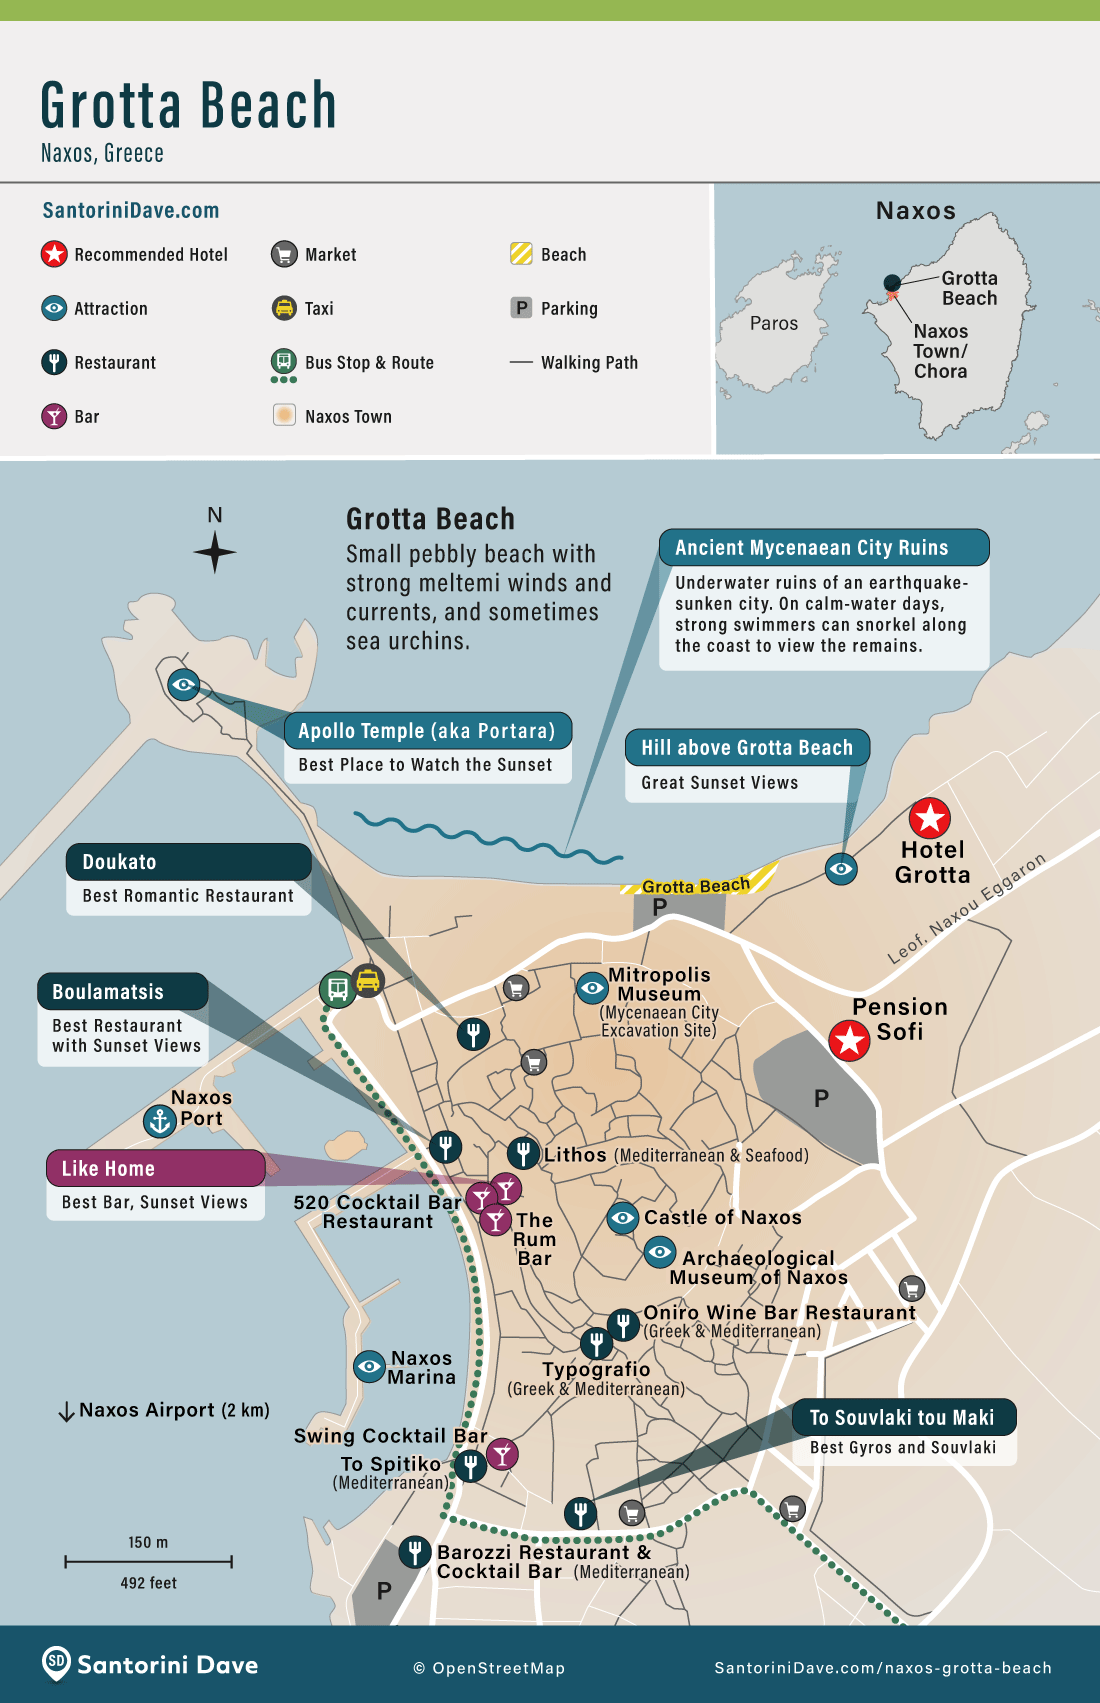 Map showing the facilities, restaurants, hotels, and landmarks around Grotta beach on Naxos.